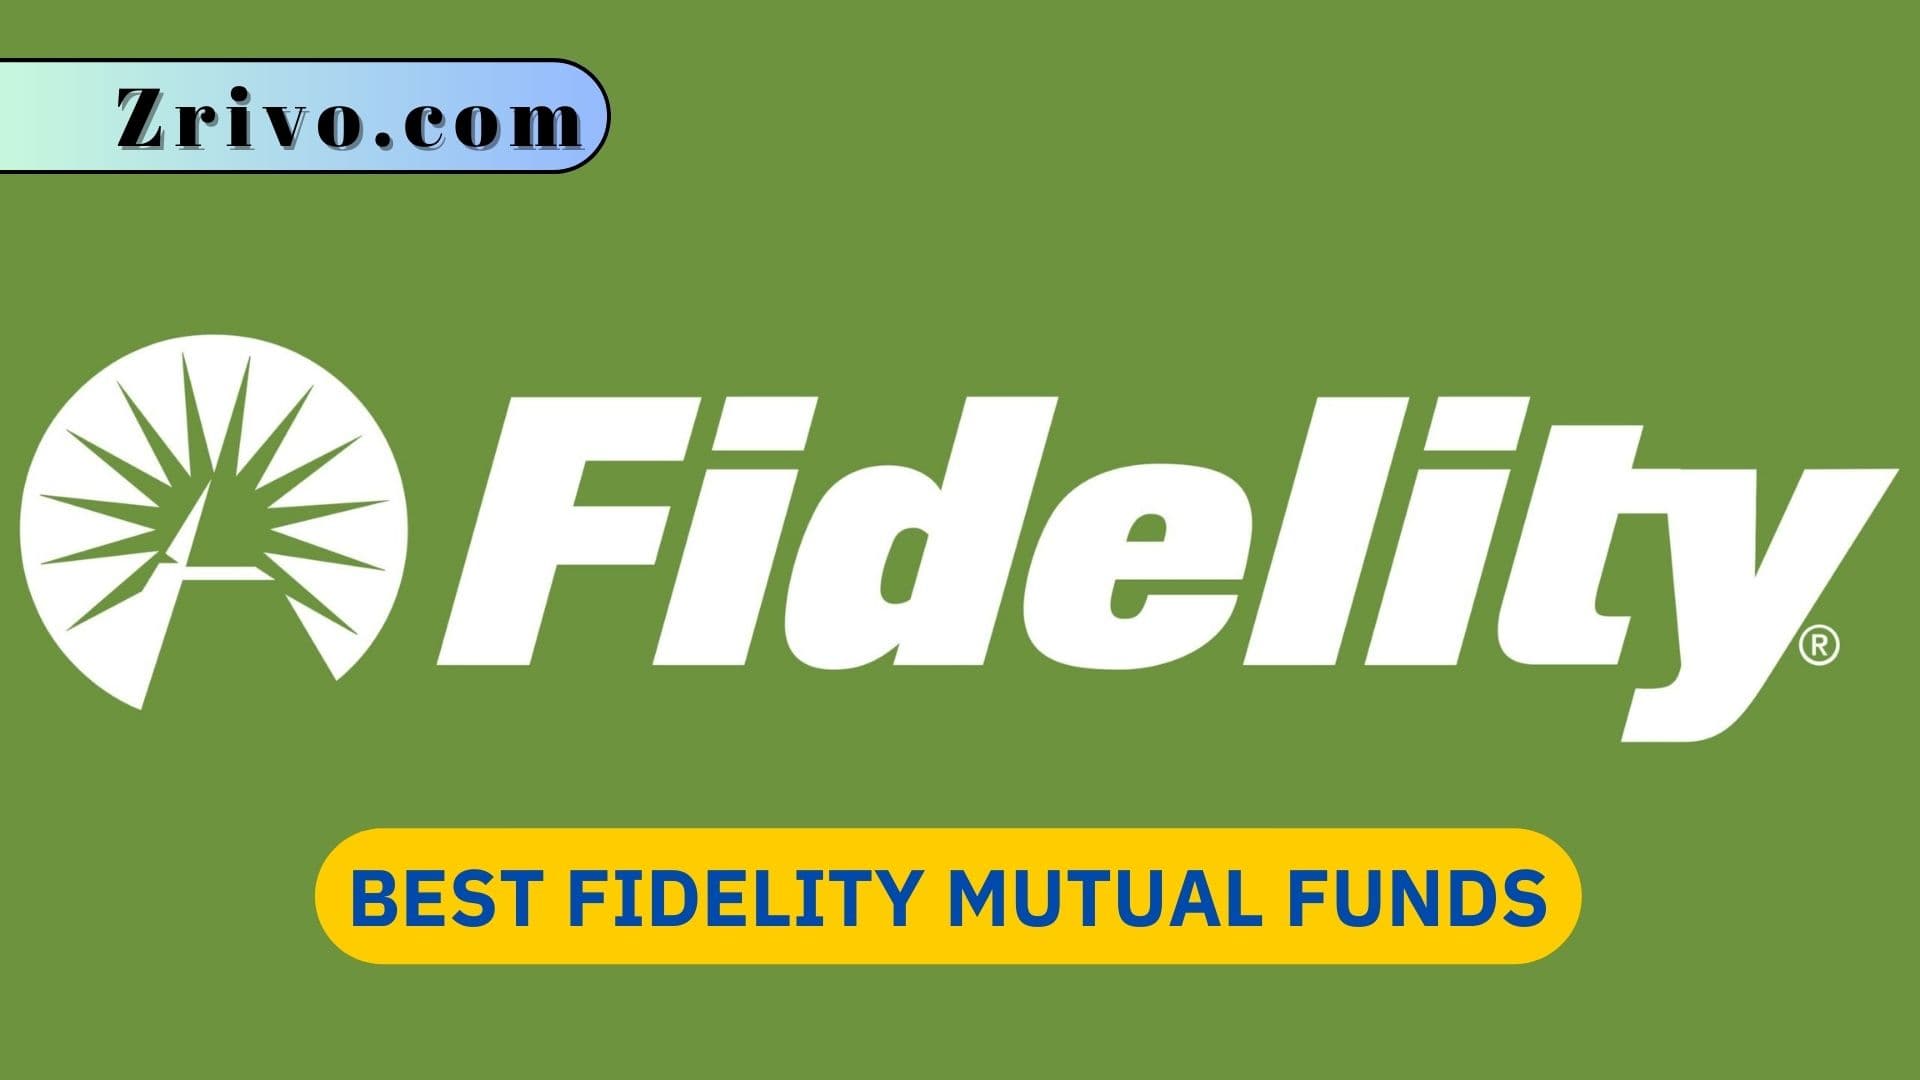 Best Fidelity Mutual Funds